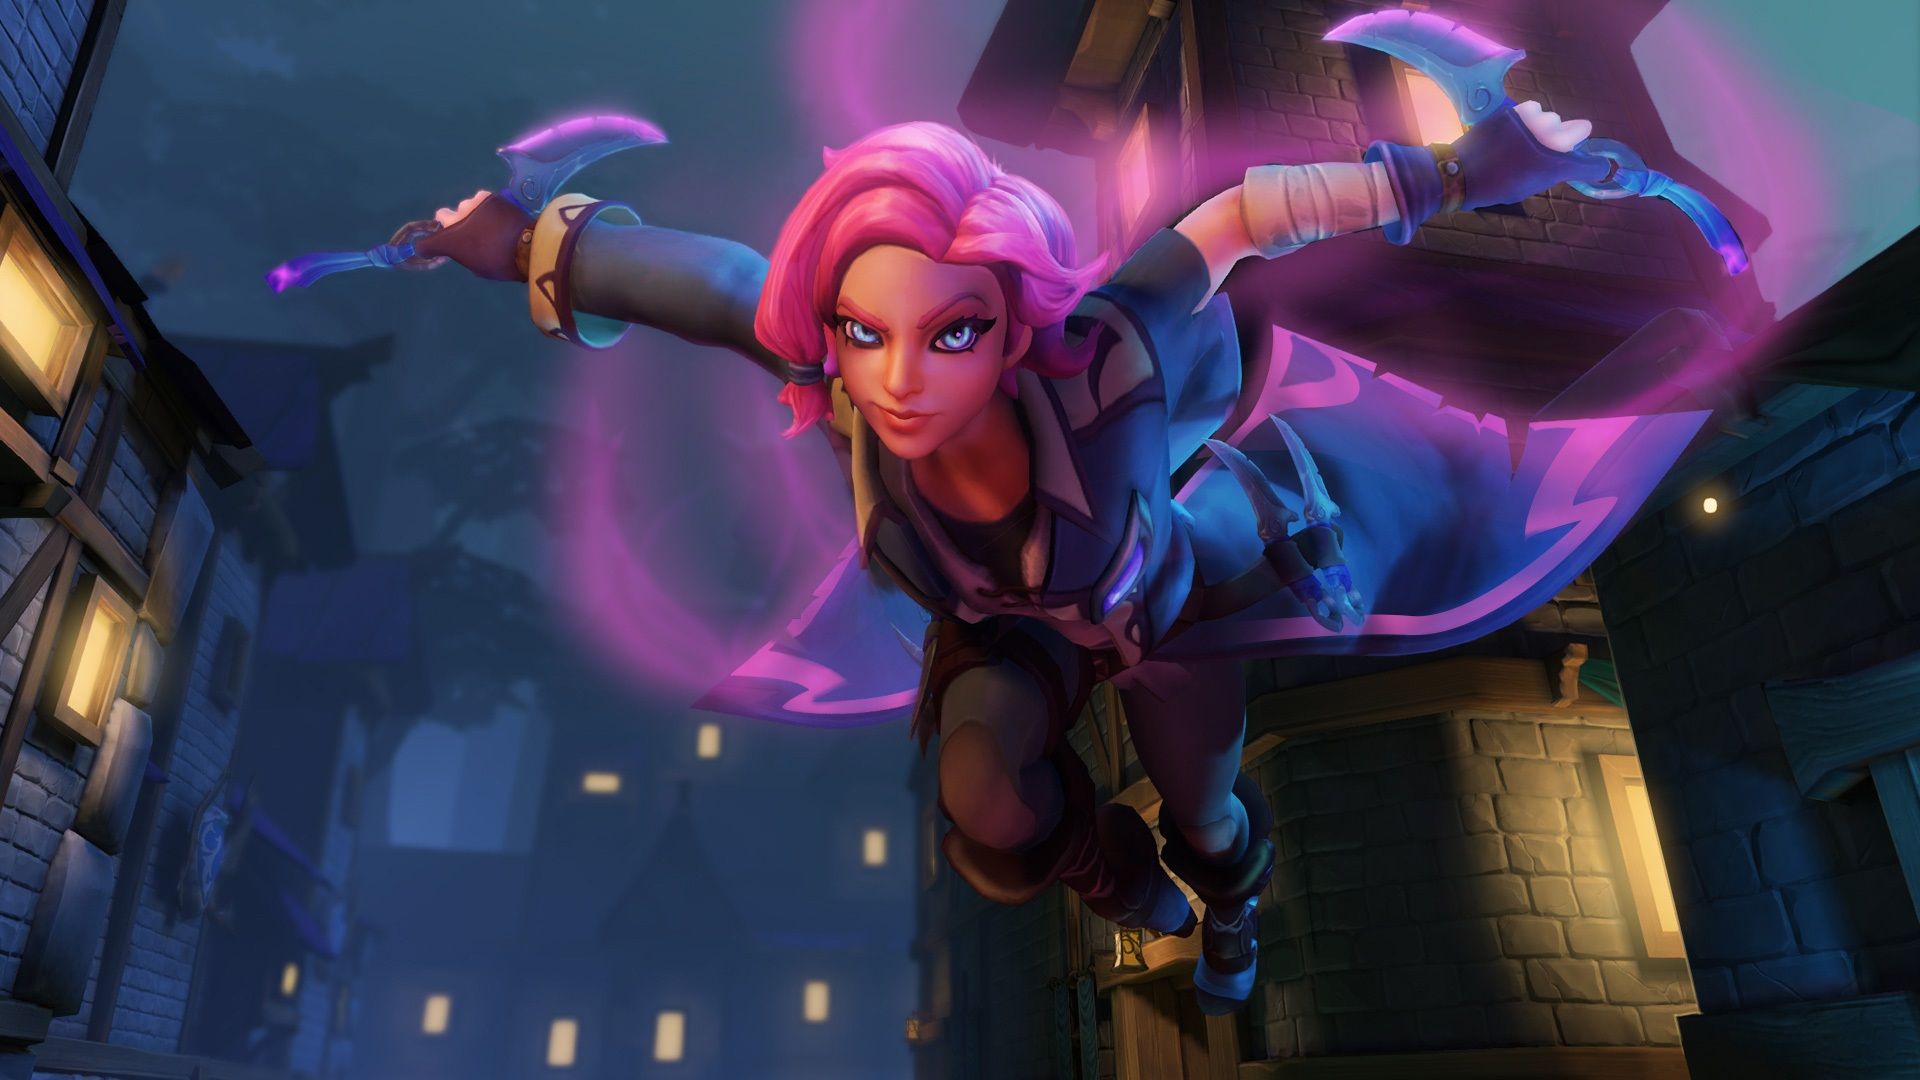 Best free PC games: Paladins. Image shows a lady jumping and holding two knives. She has vibrant hair.